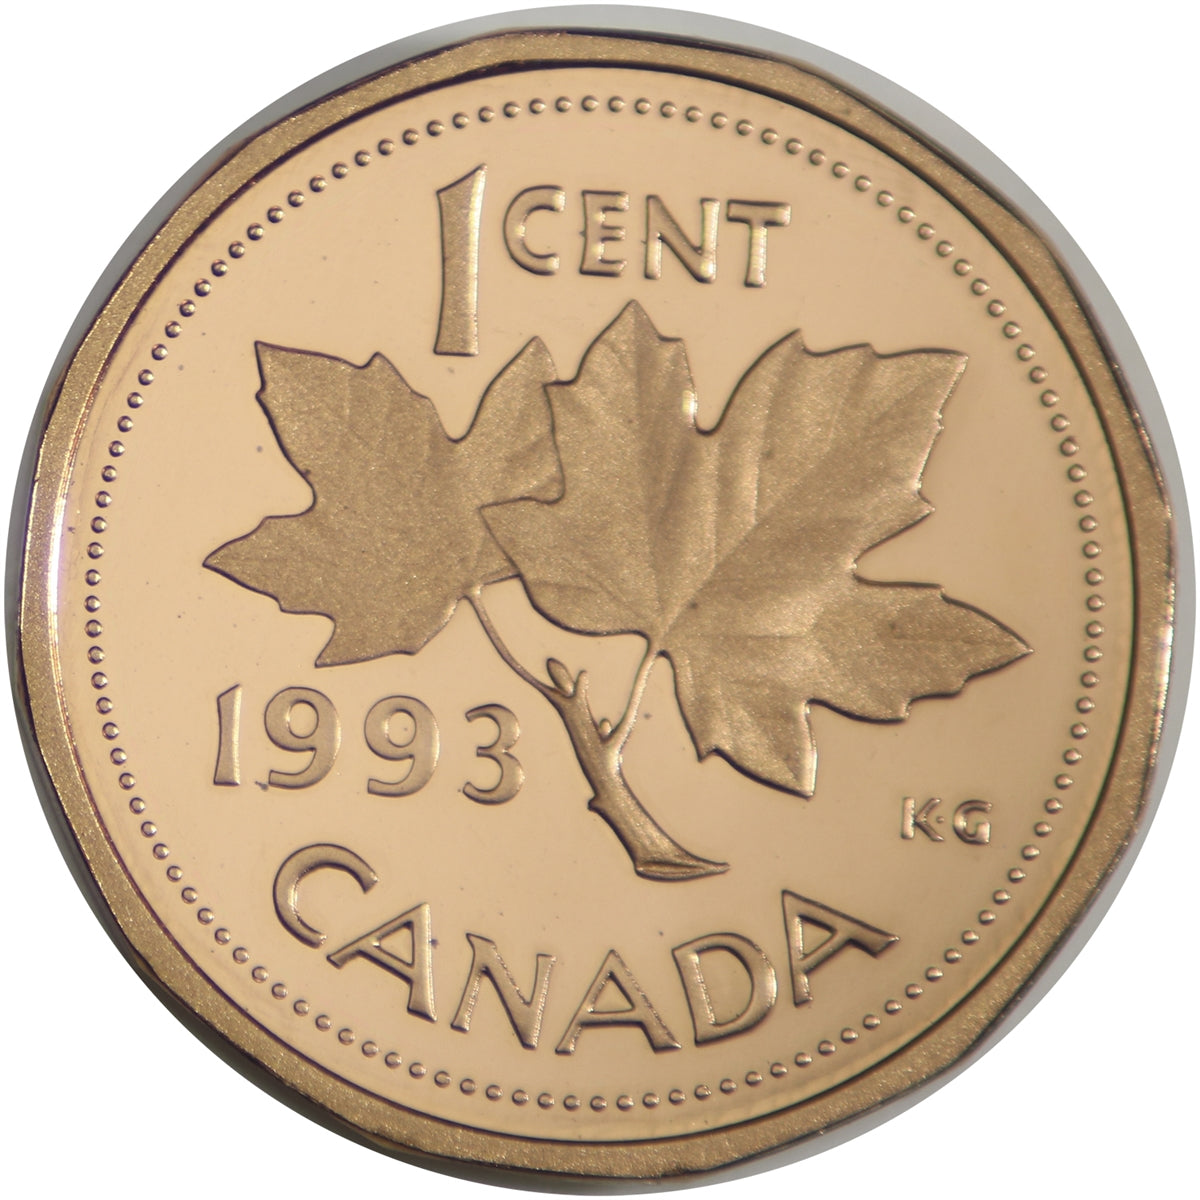 1993 Canada 1-cent Proof